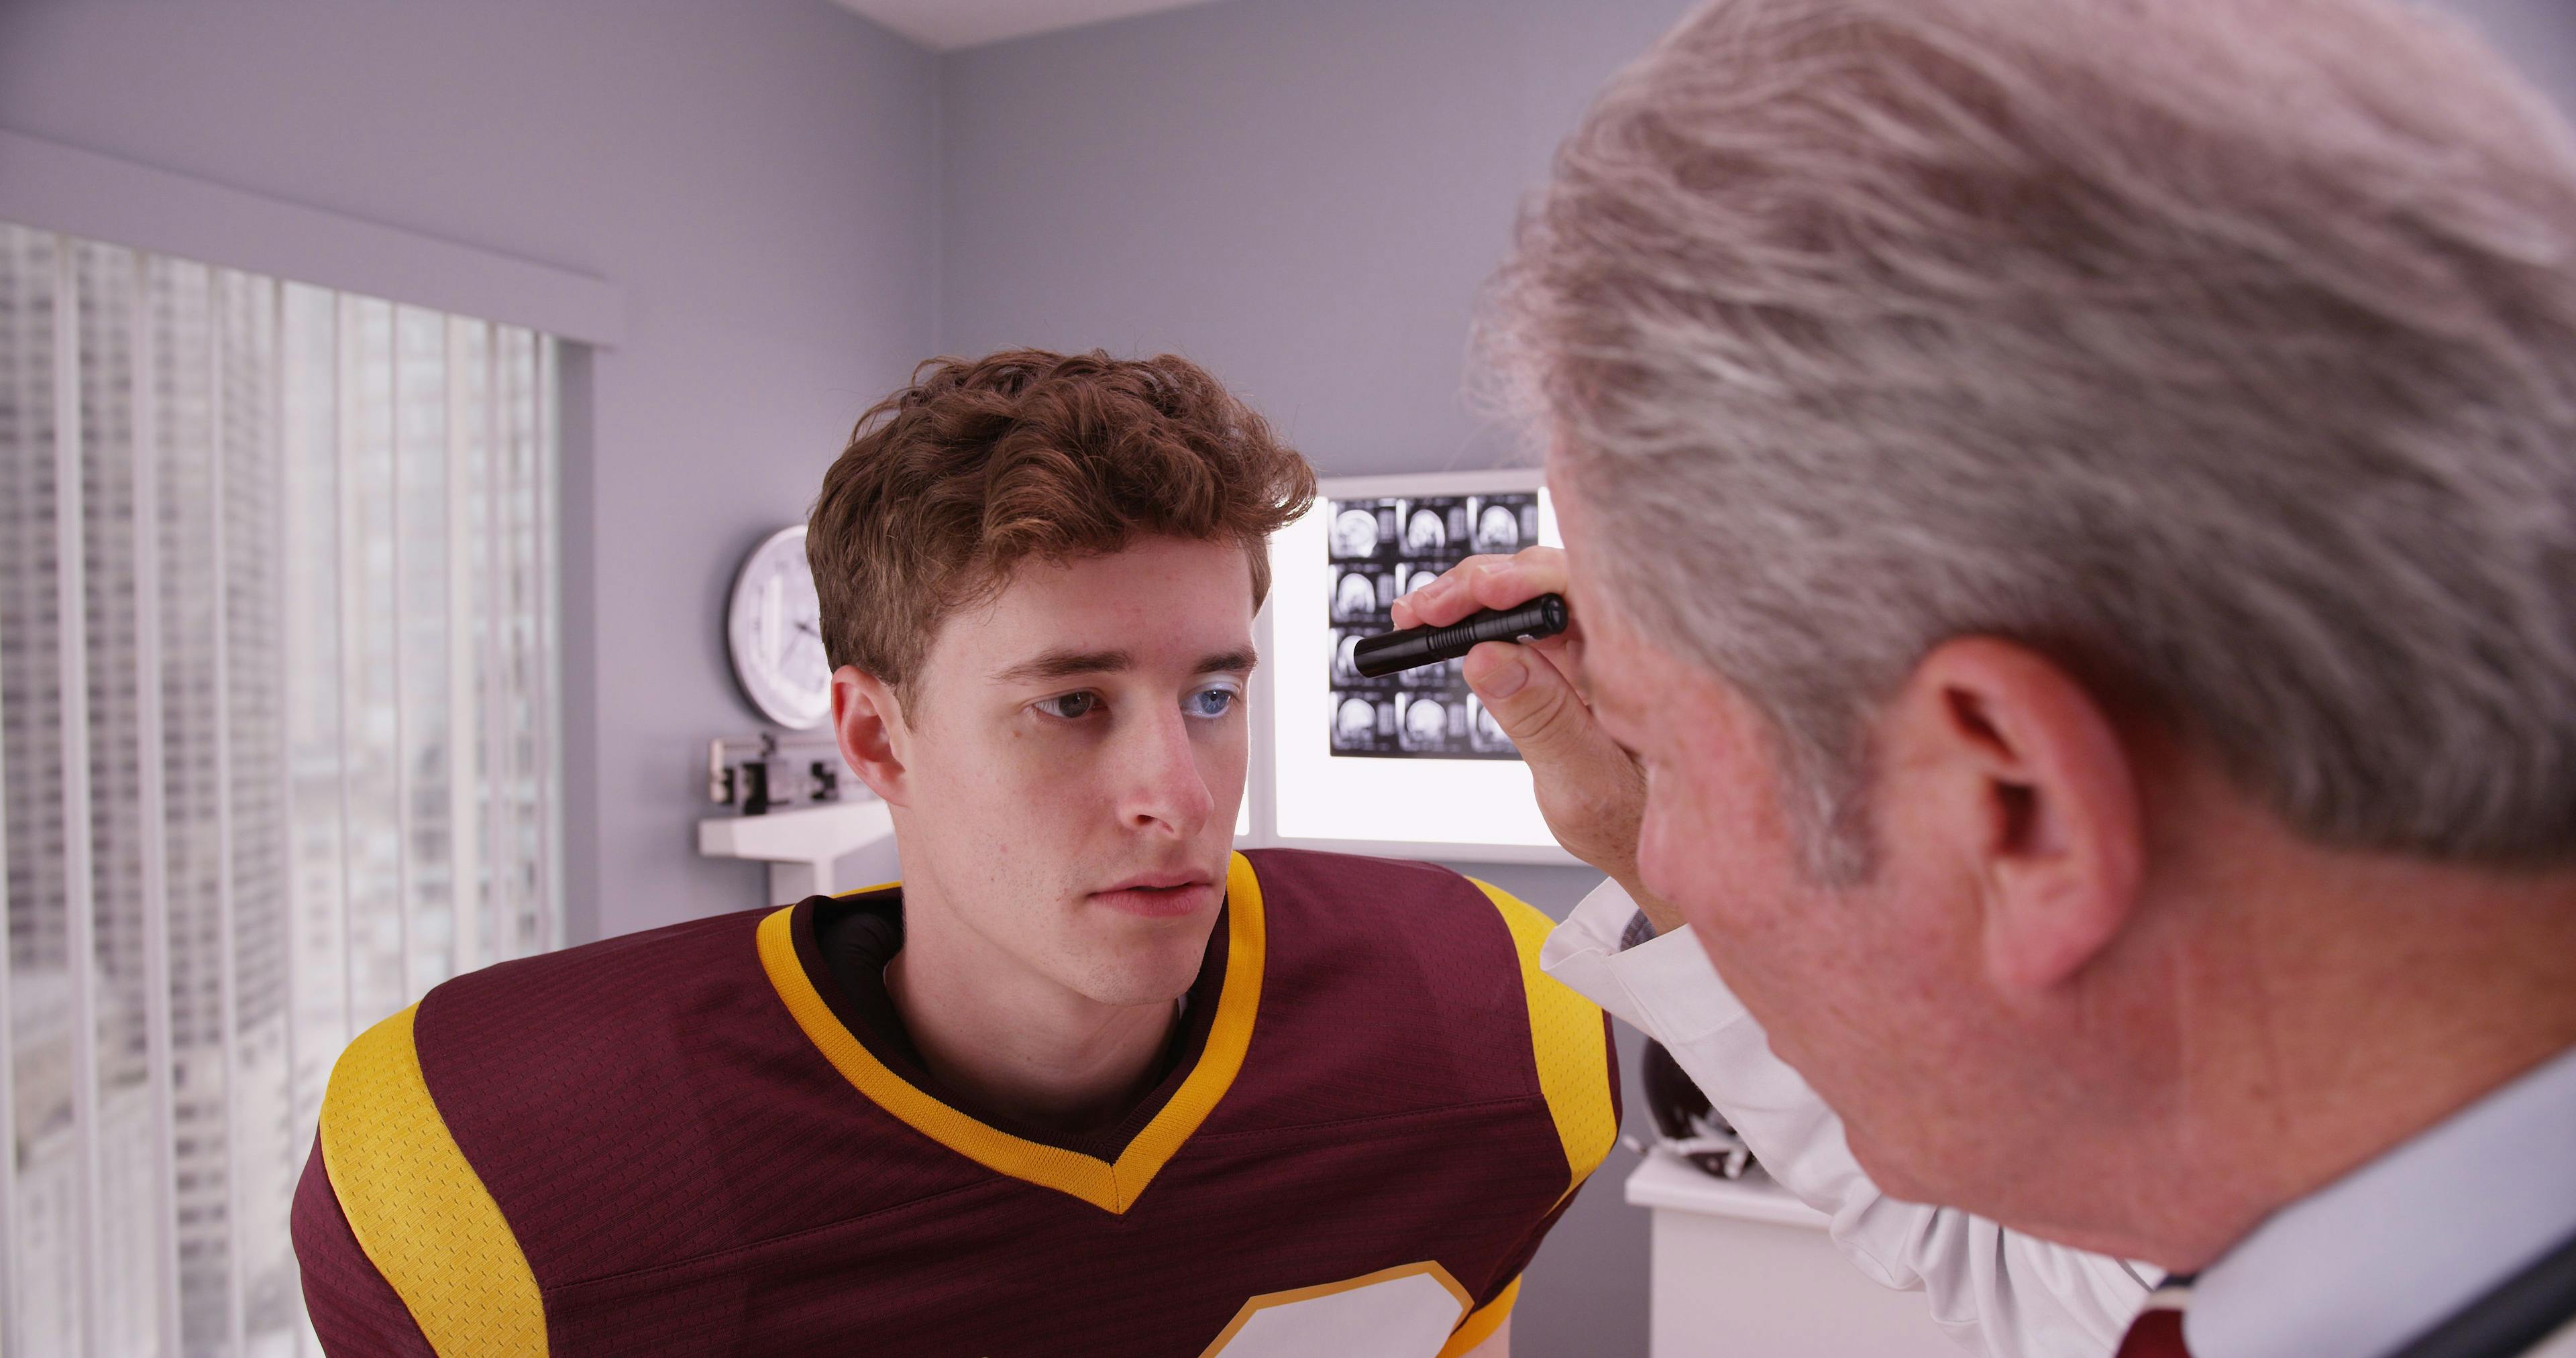 Study: 1 in 6 Children with Concussion Experience a Second Concussion Within 2 Years